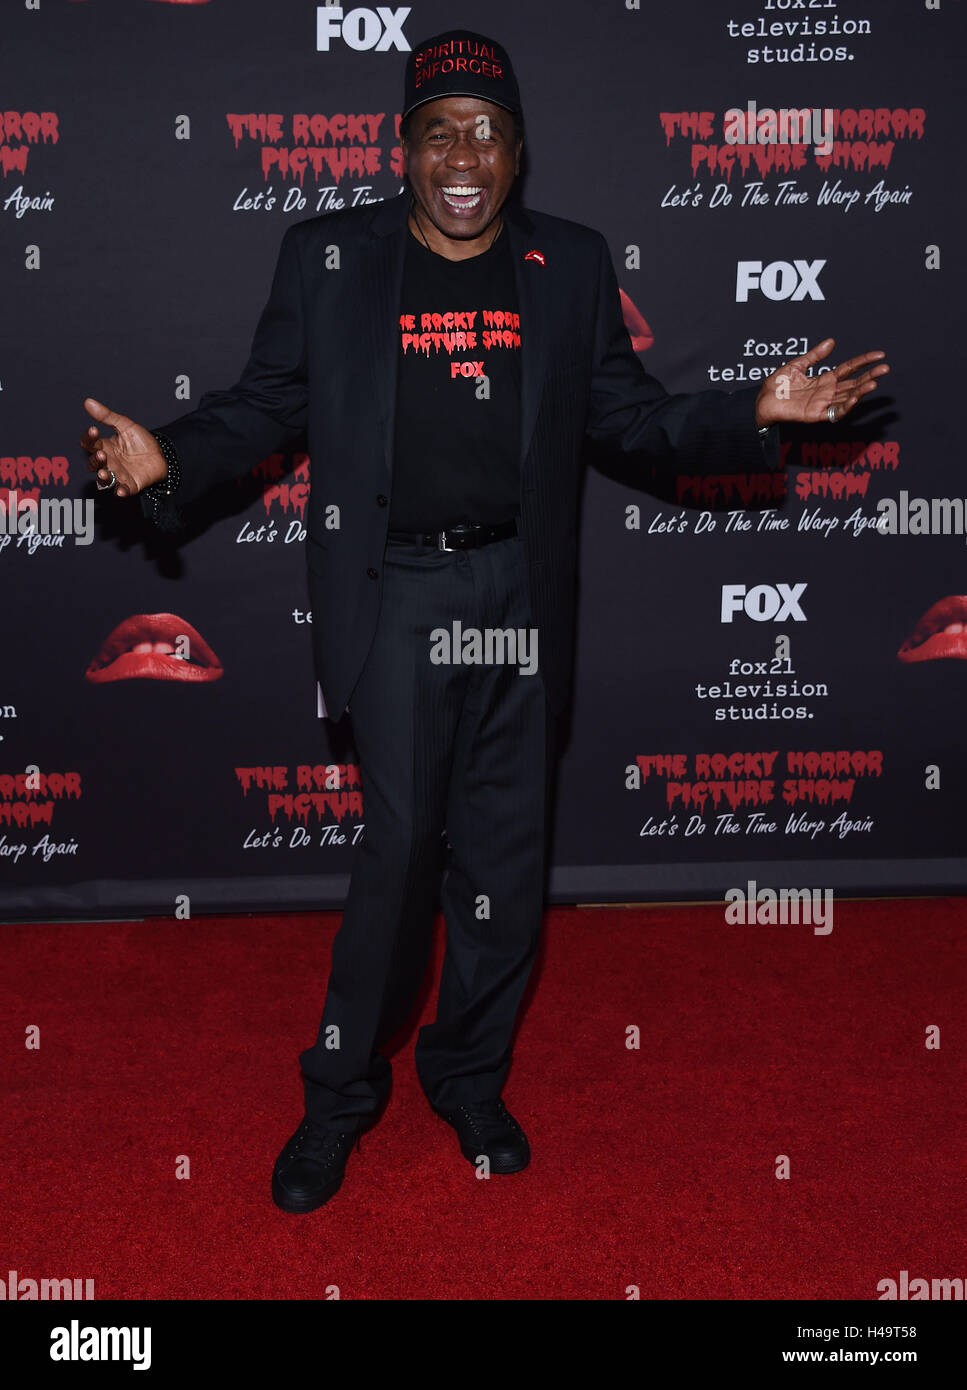 West Hollywood, California, USA. 13th Oct, 2016. Ben Vereen arrives for the premiere of ''The Rocky Horror Picture Show; Let's Do The Time Warp Again'' Premiere at the Roxy theater. Credit:  Lisa O'Connor/ZUMA Wire/Alamy Live News Stock Photo